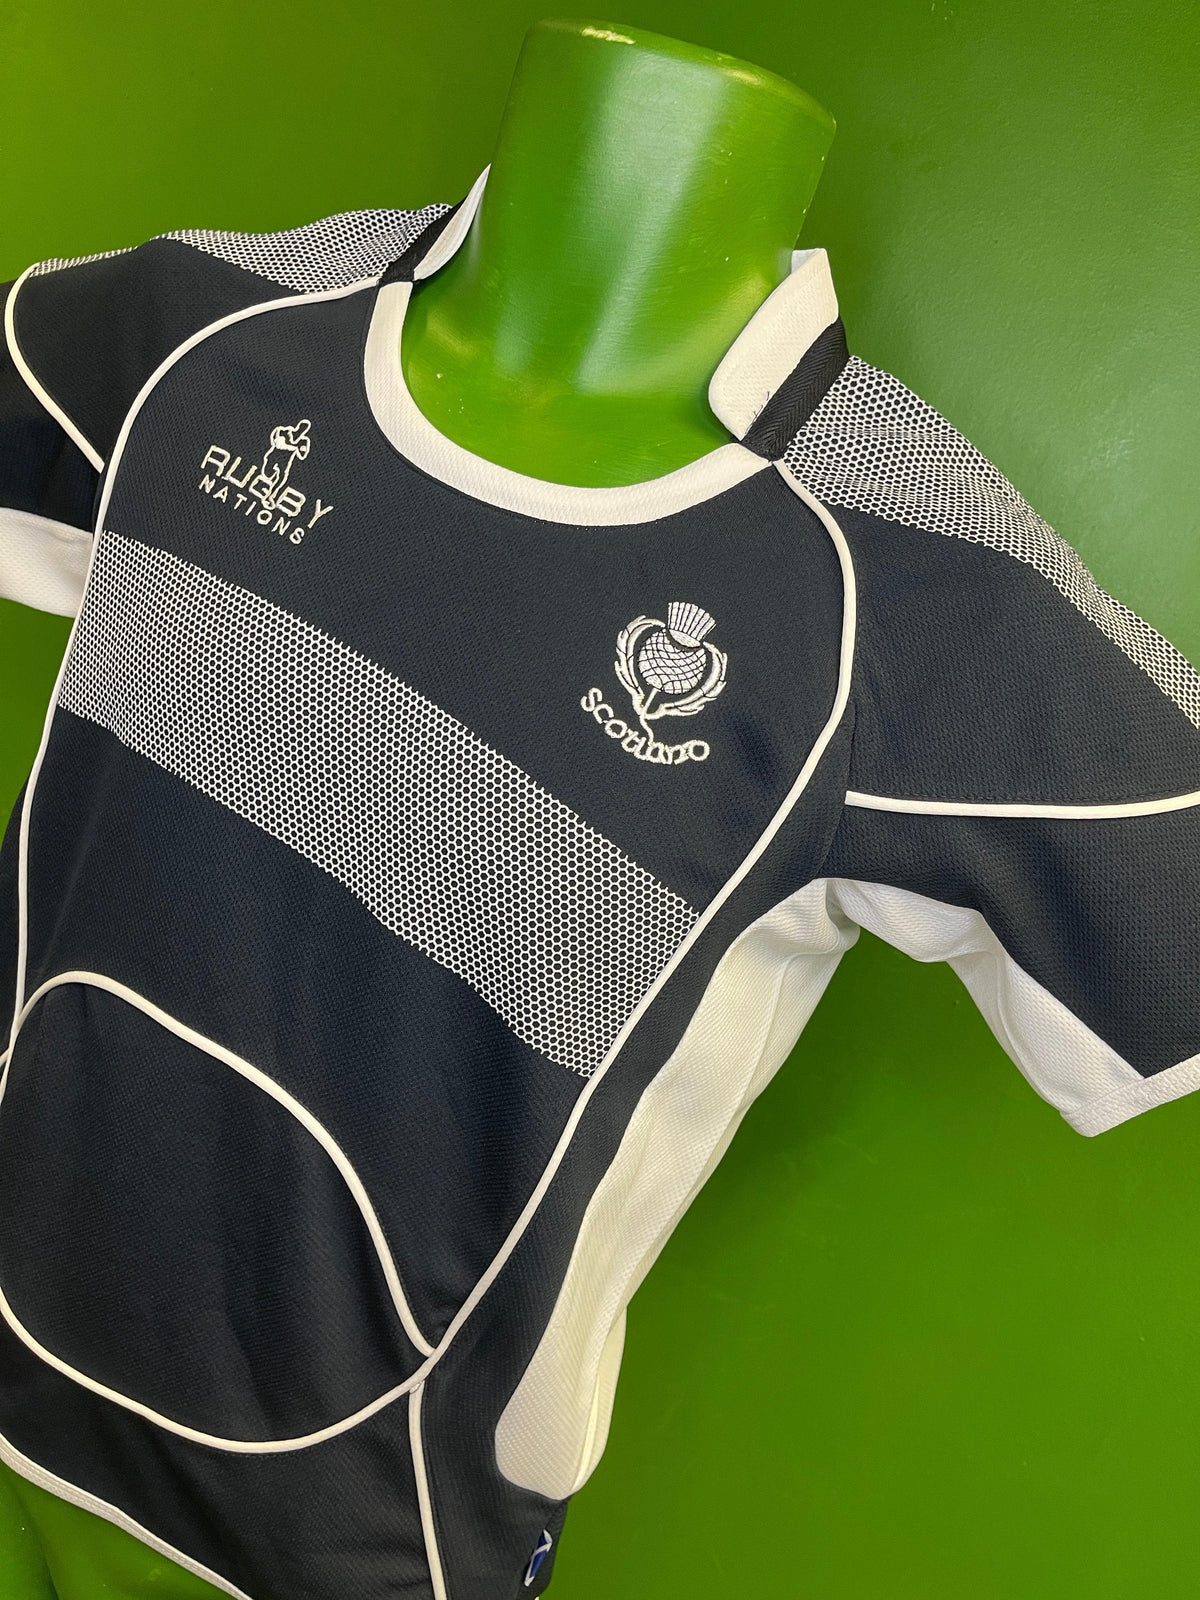 Rugby Nations Scotland Top Jersey Shirt Size 28 Youth Medium